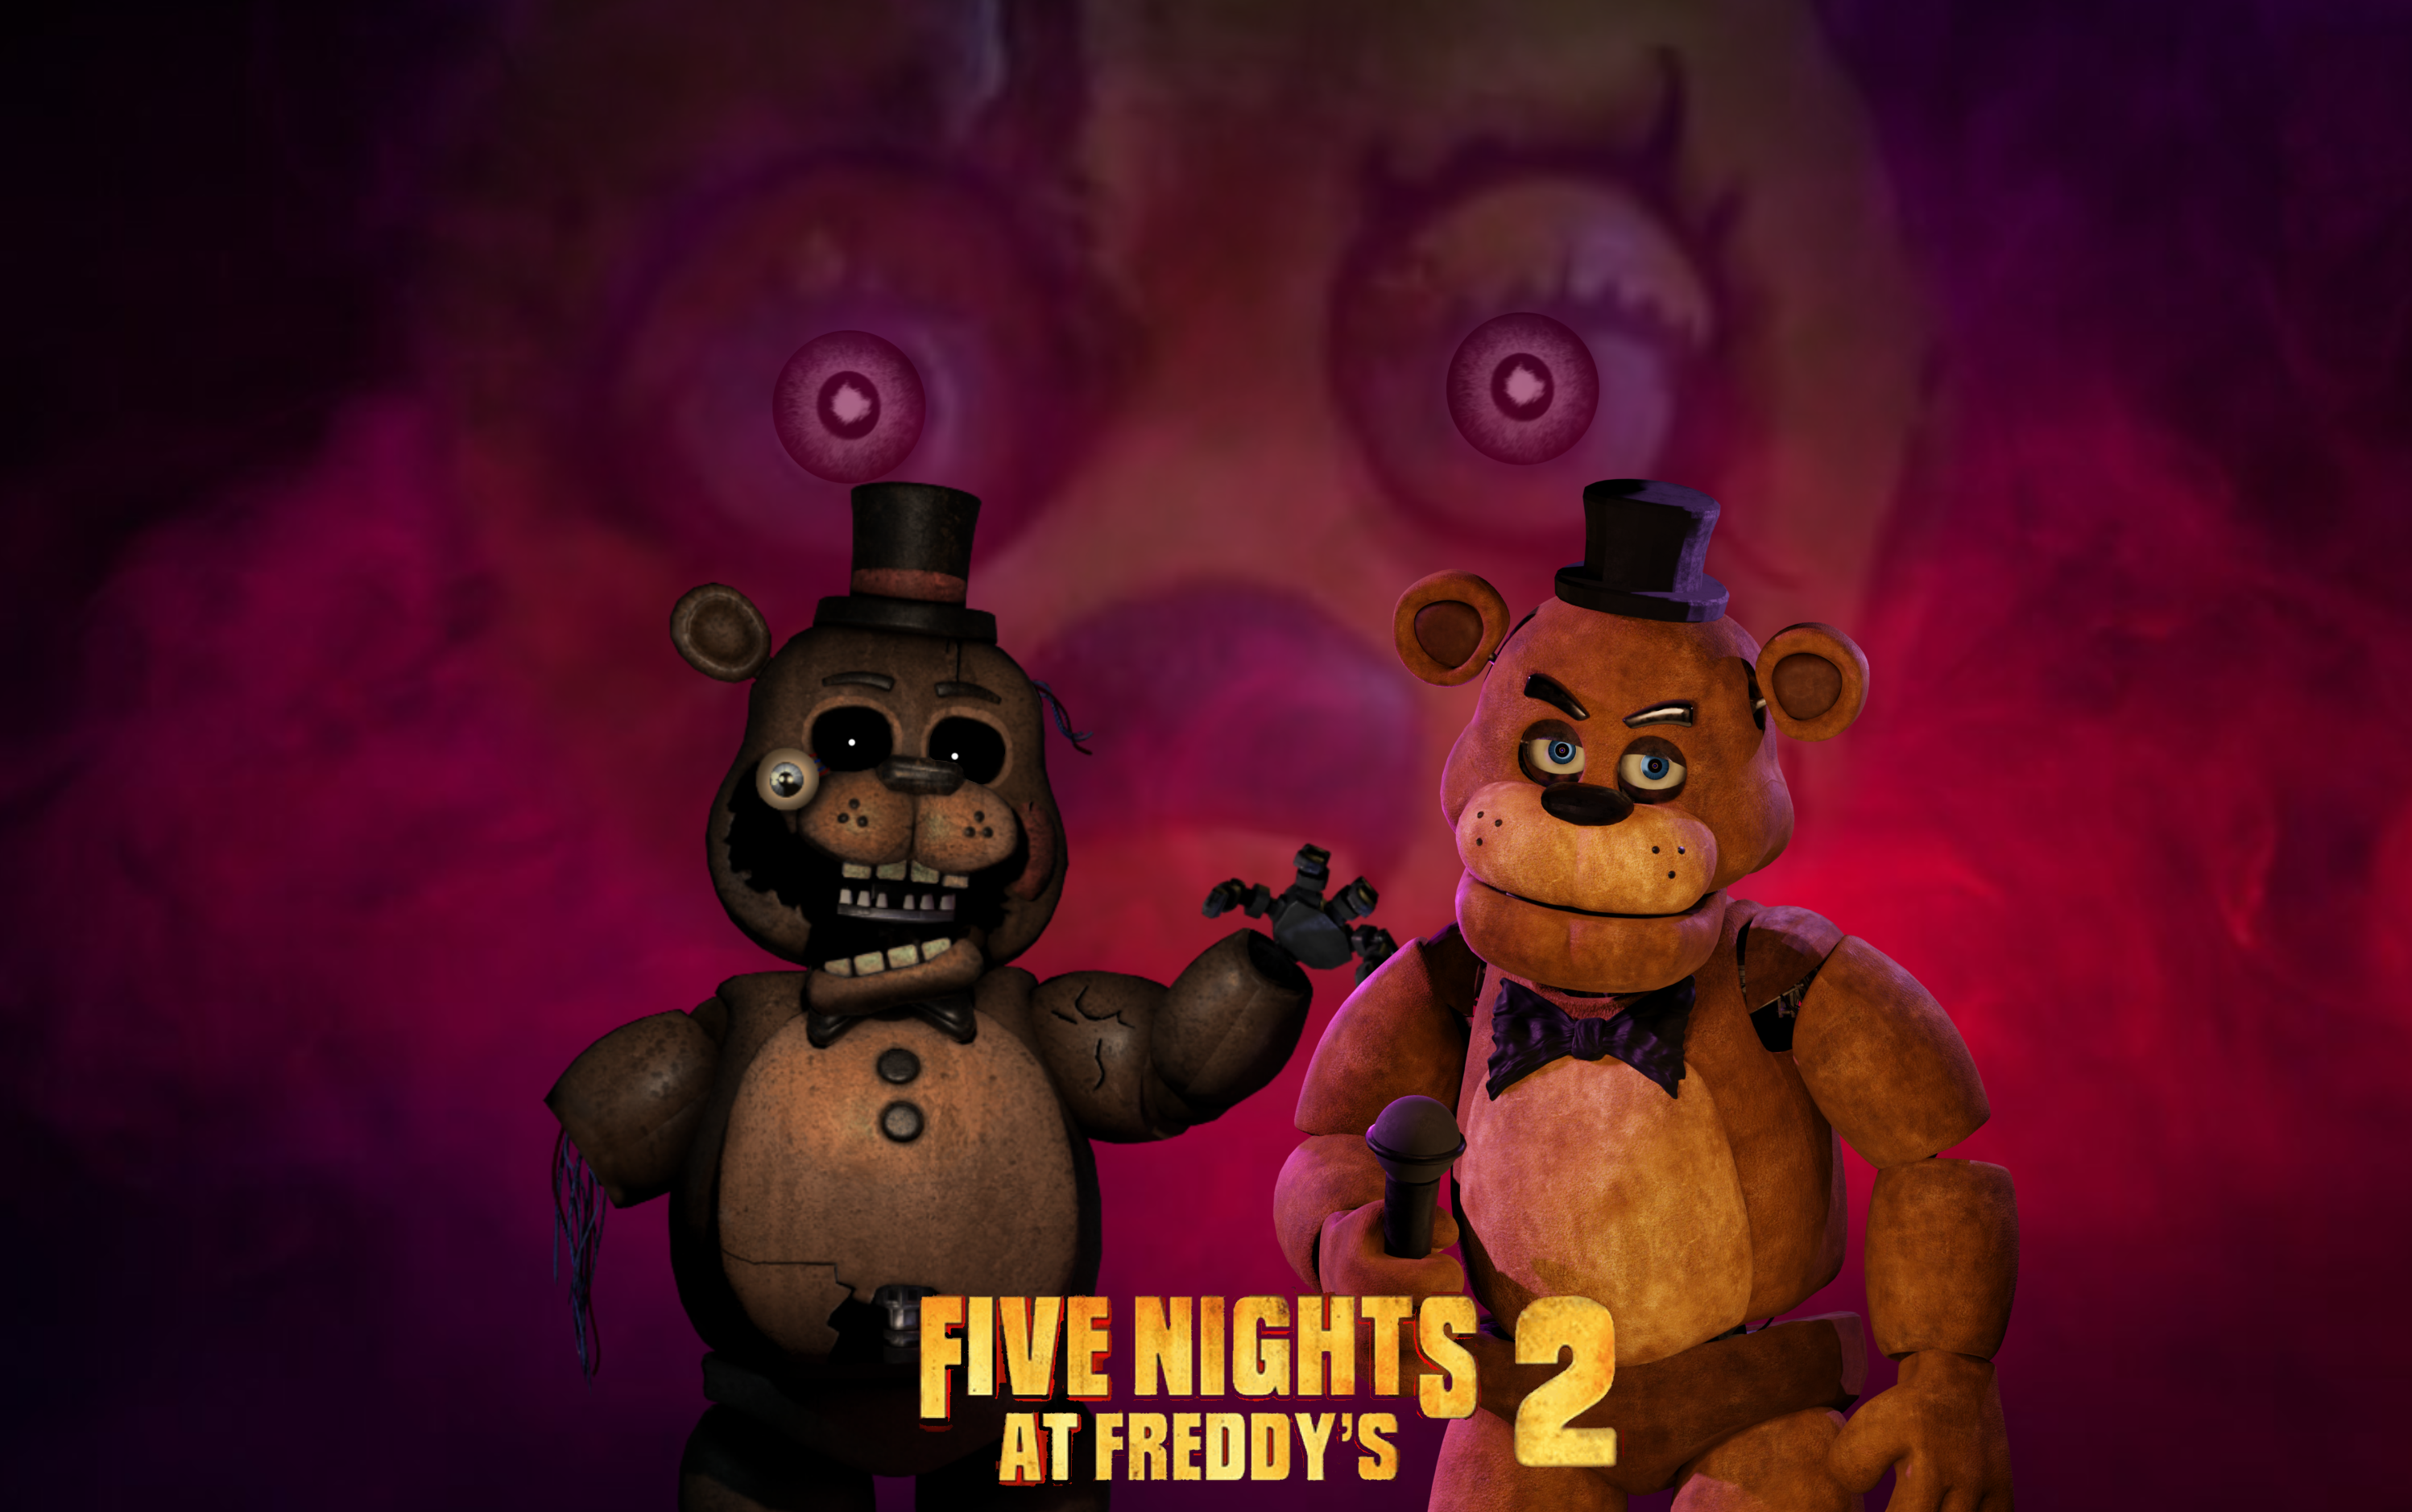 Freddy And His Friends Ready to See FNAF Movie by JosephPlus2001